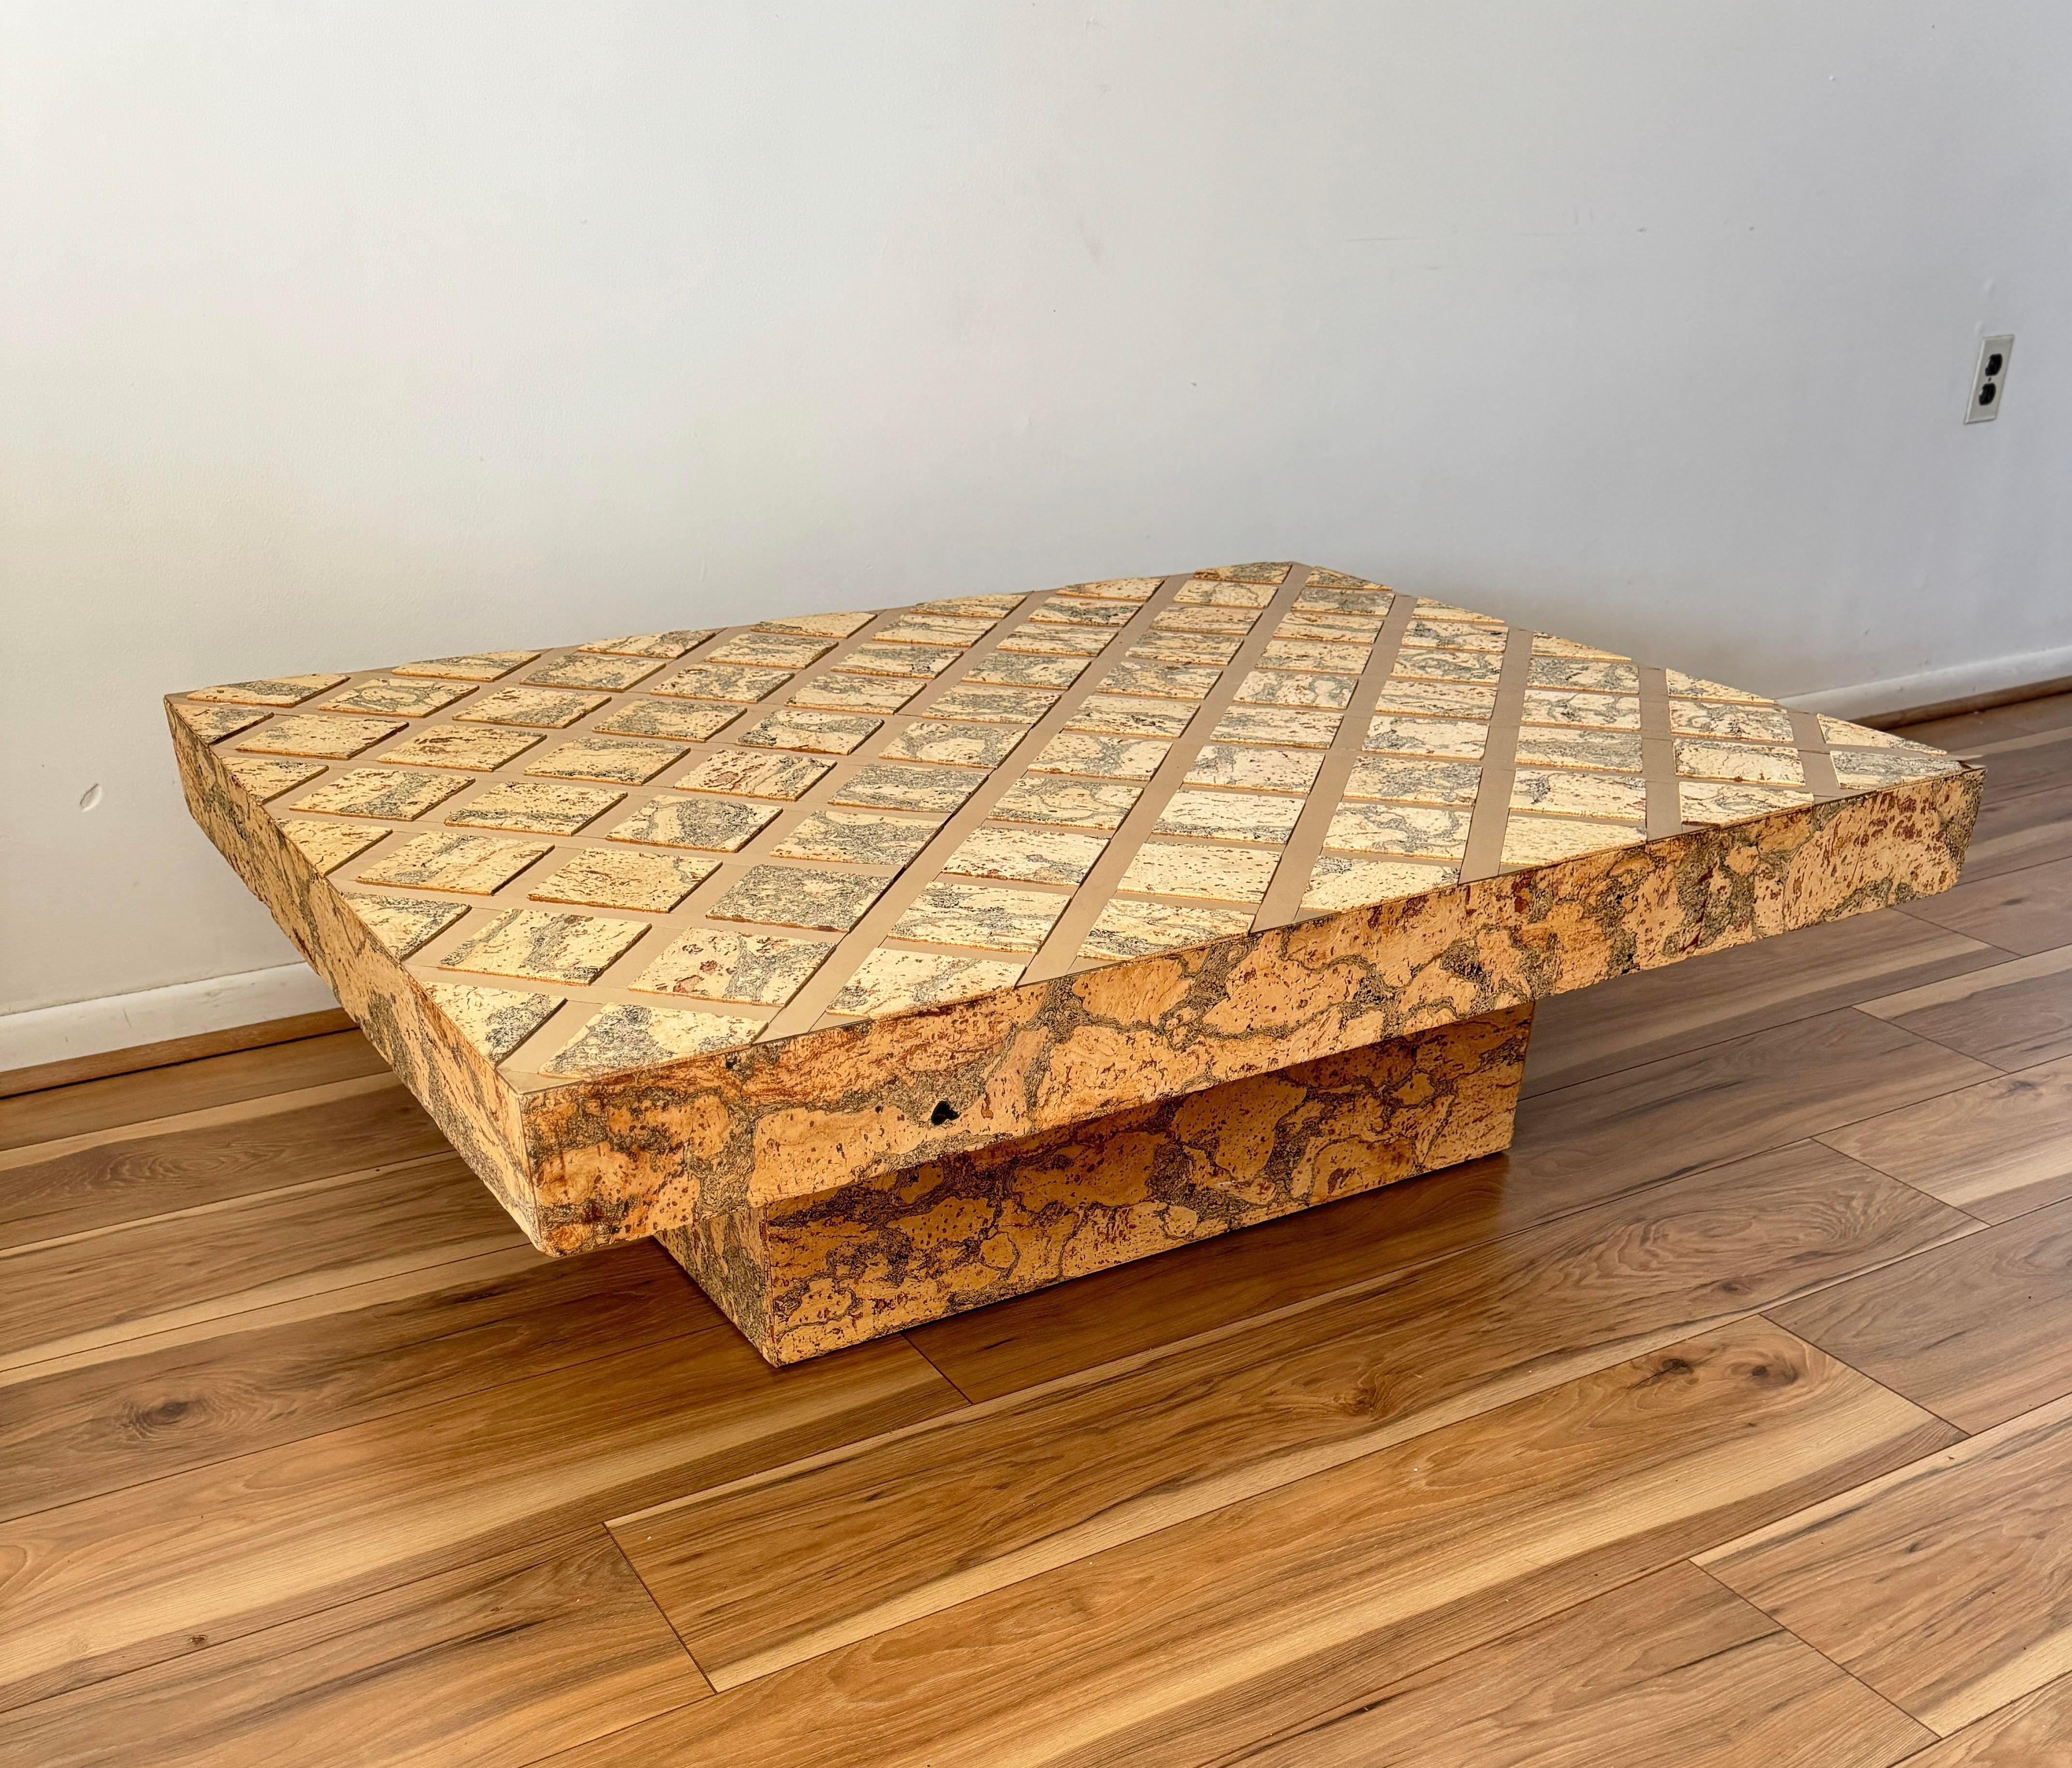 This gorgeous vintage cork coffee table captures attention through the compelling contrast between the natural, earthy texture of cork and the pronounced luxury of the golden inlay.
The stark contrast between these elements creates a captivating